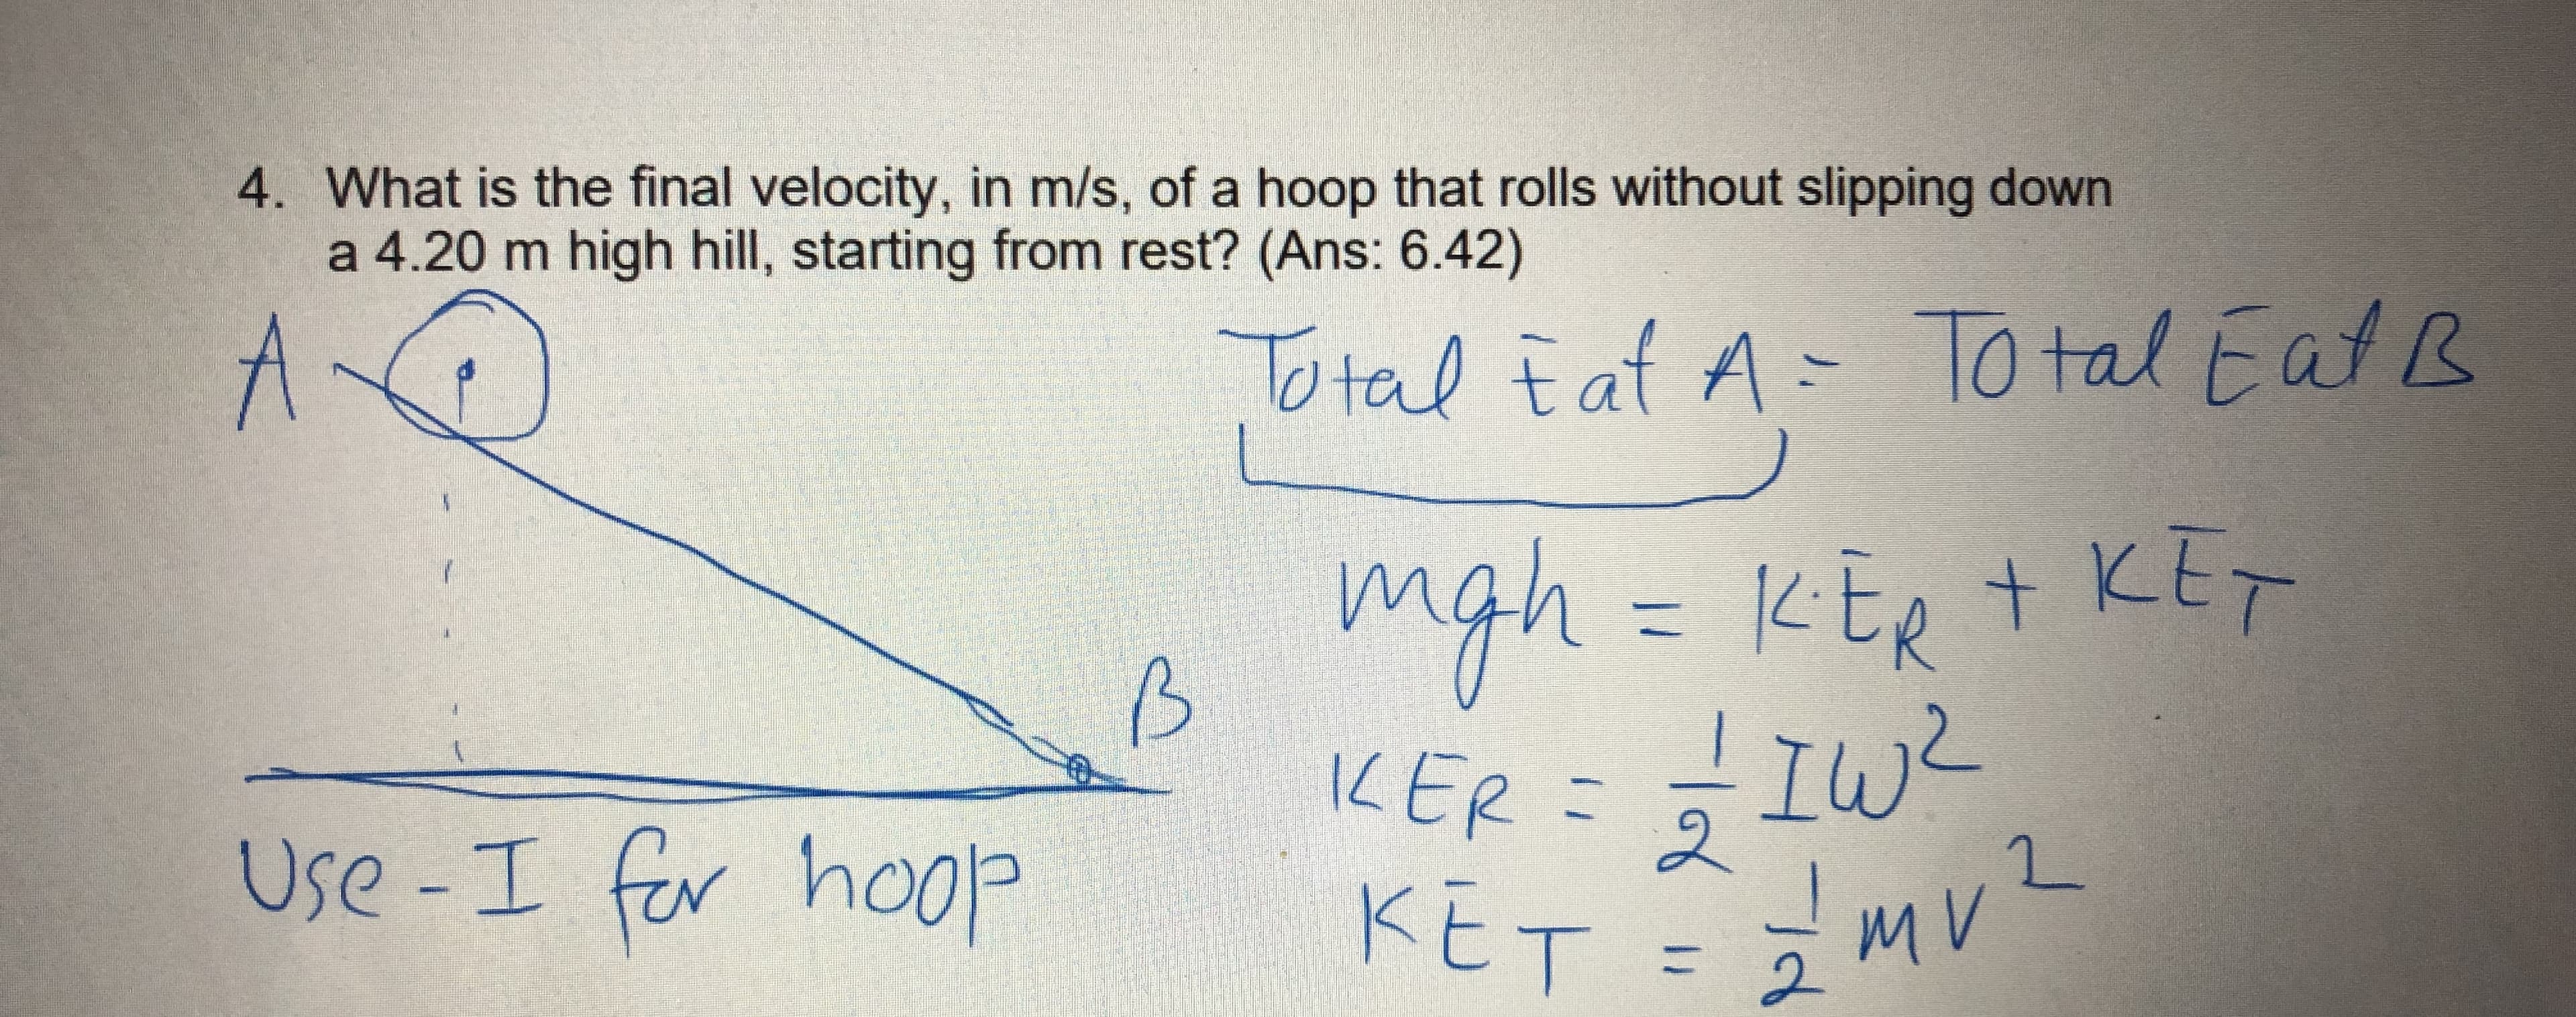 4. What is the final velocity, in m/s, of a hoop that rolls without slipping down
a 4.20 m high hill, starting from rest? (Ans: 6.42)
A.
To tal E at A-
To tal Fat B
mgh= KER t KET
KER + KET
KtR
11
IKER =
IW?
2.
Use-I
fer hoop
KET = 3
mv?
